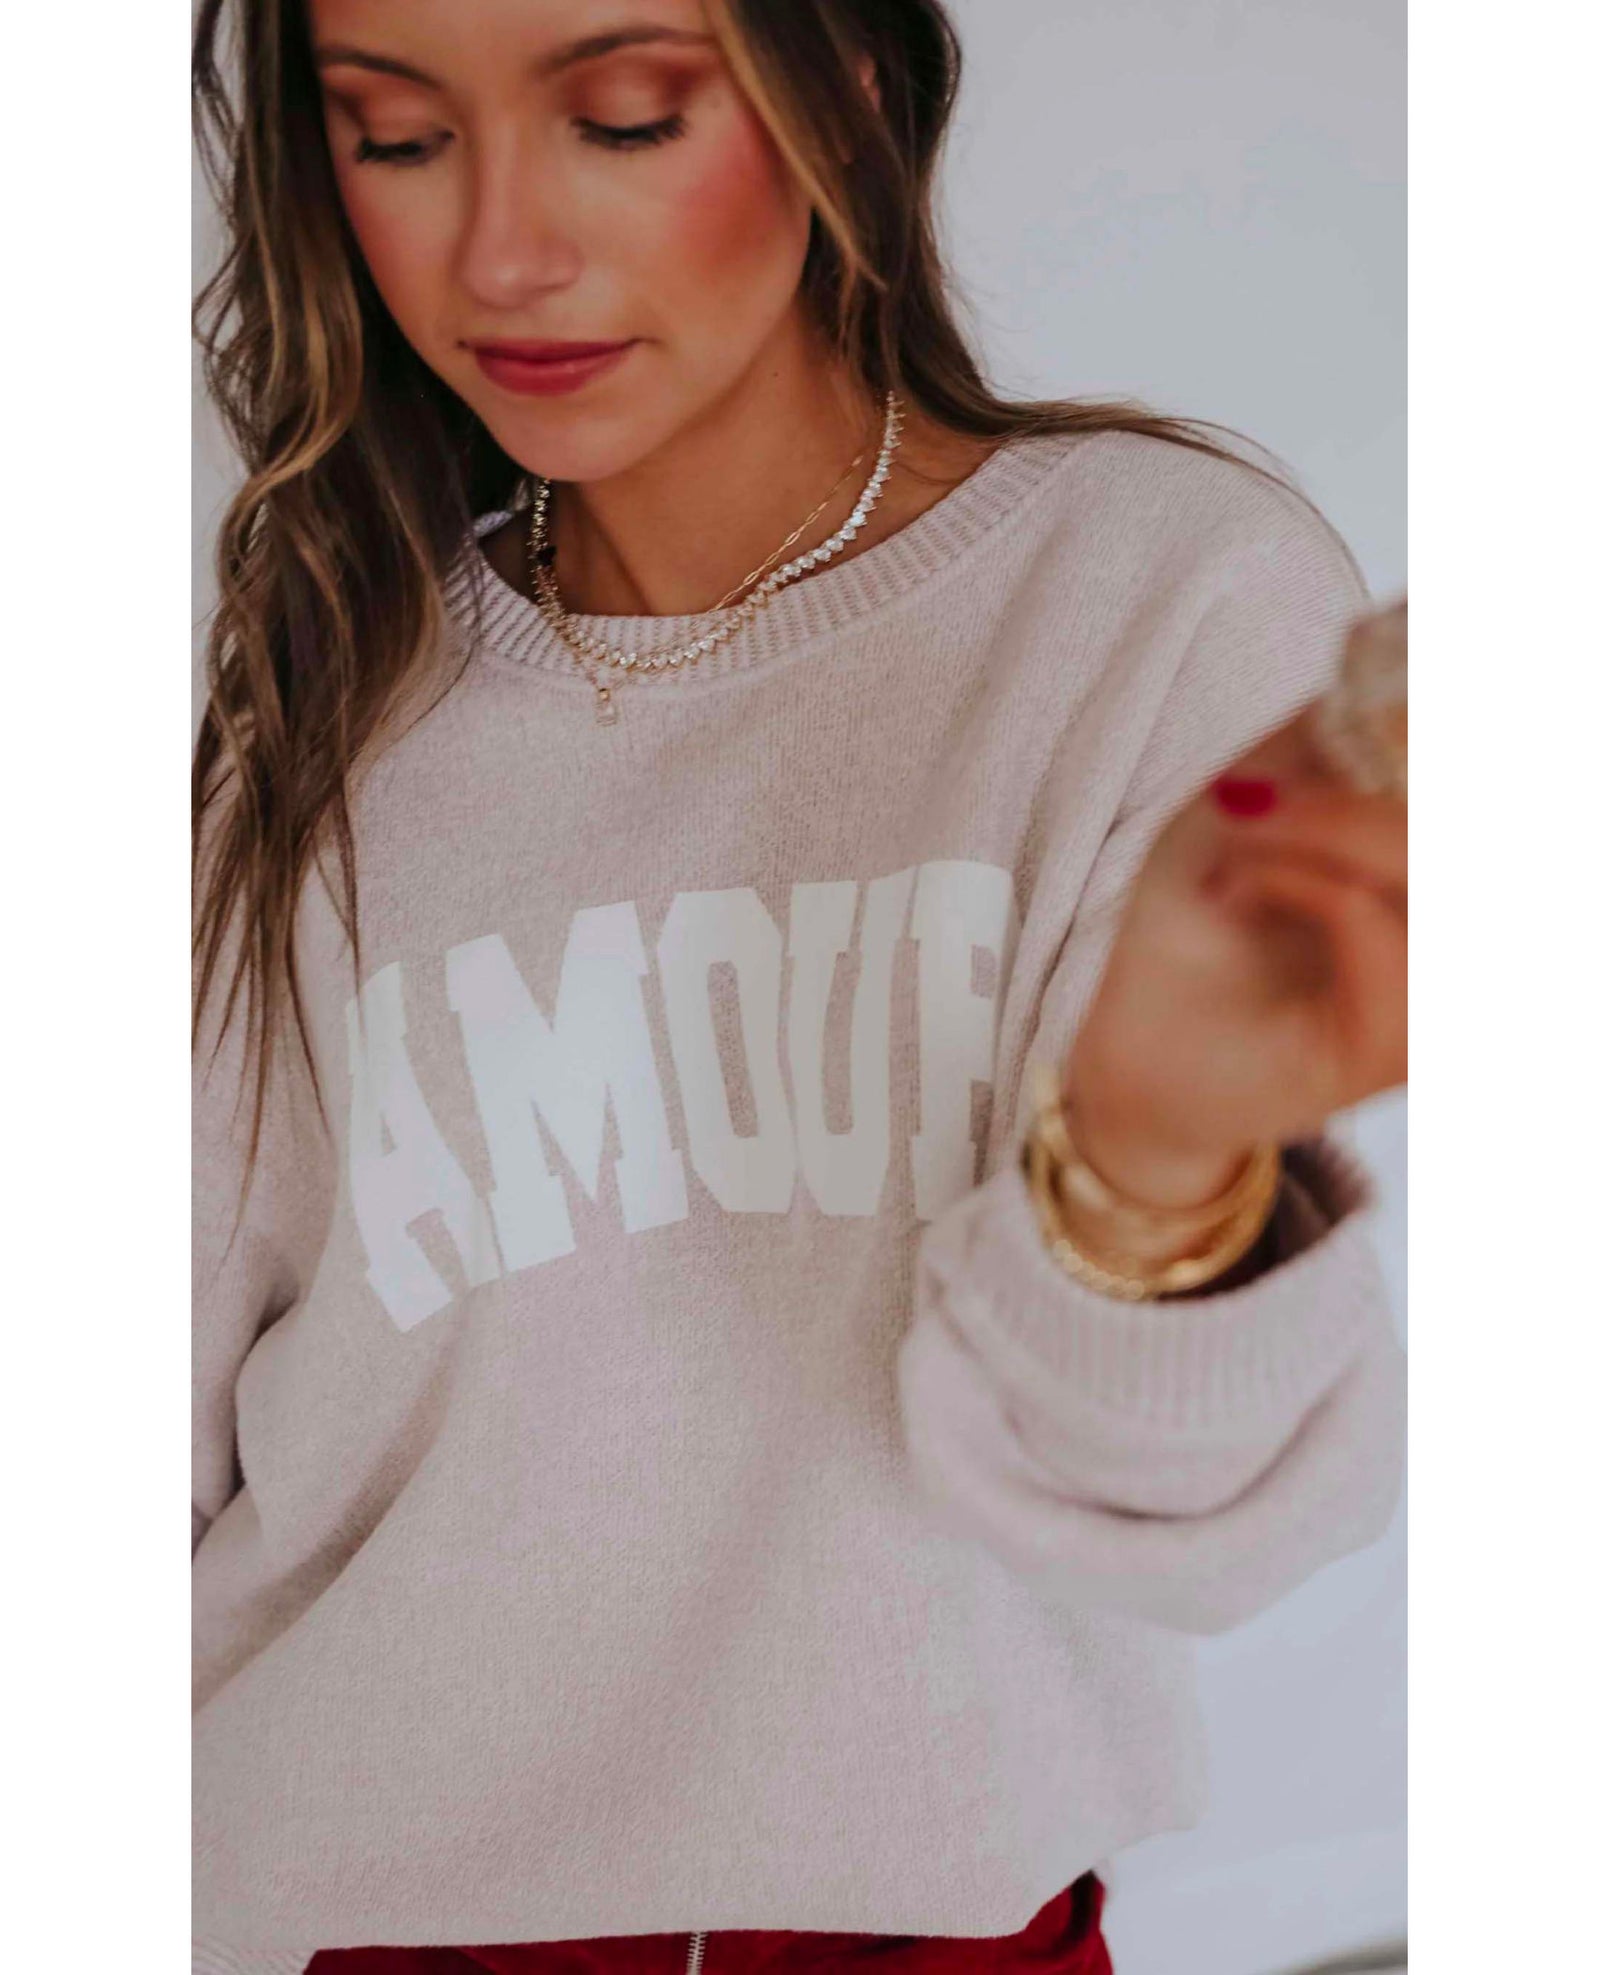 Amour Love Sweater